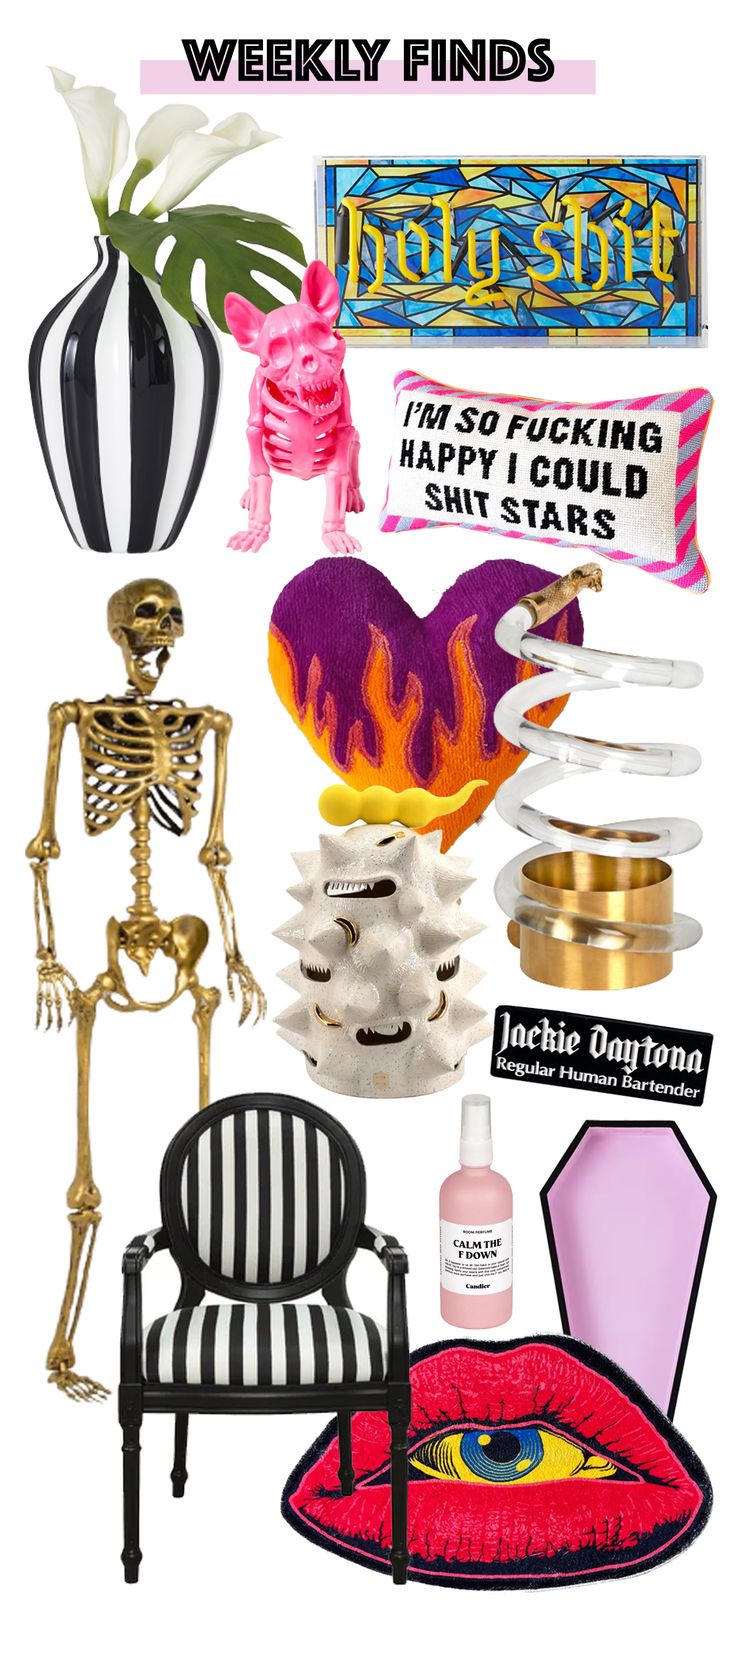 a collage of halloween items and decorations